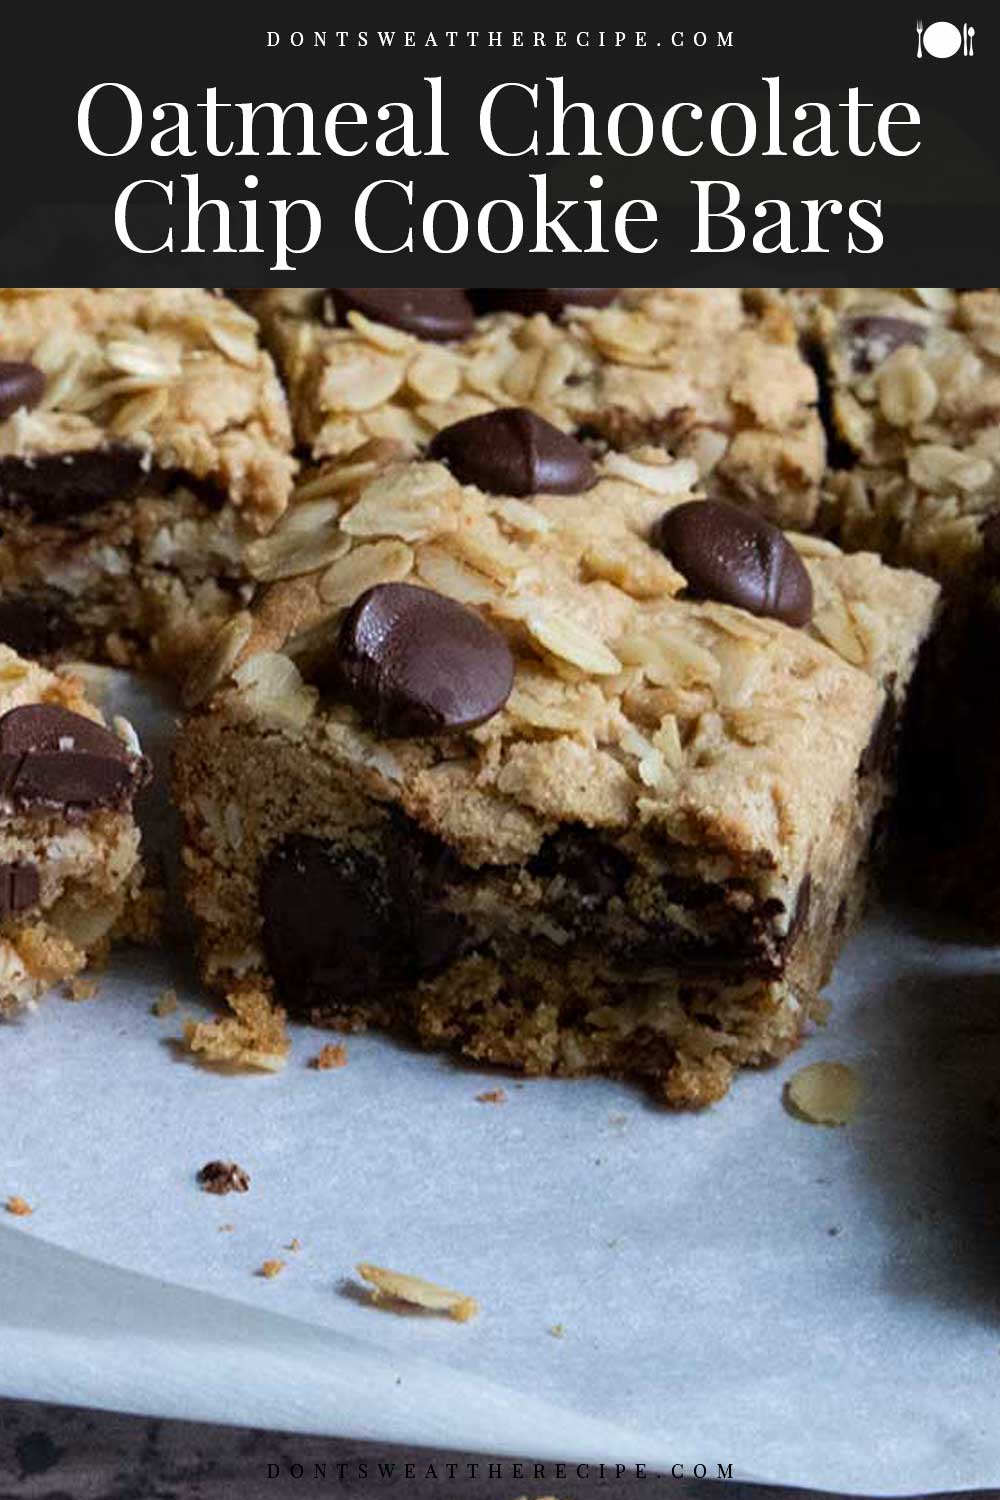 Oatmeal Chocolate Chip Cookie Bars - Don't Sweat The Recipe